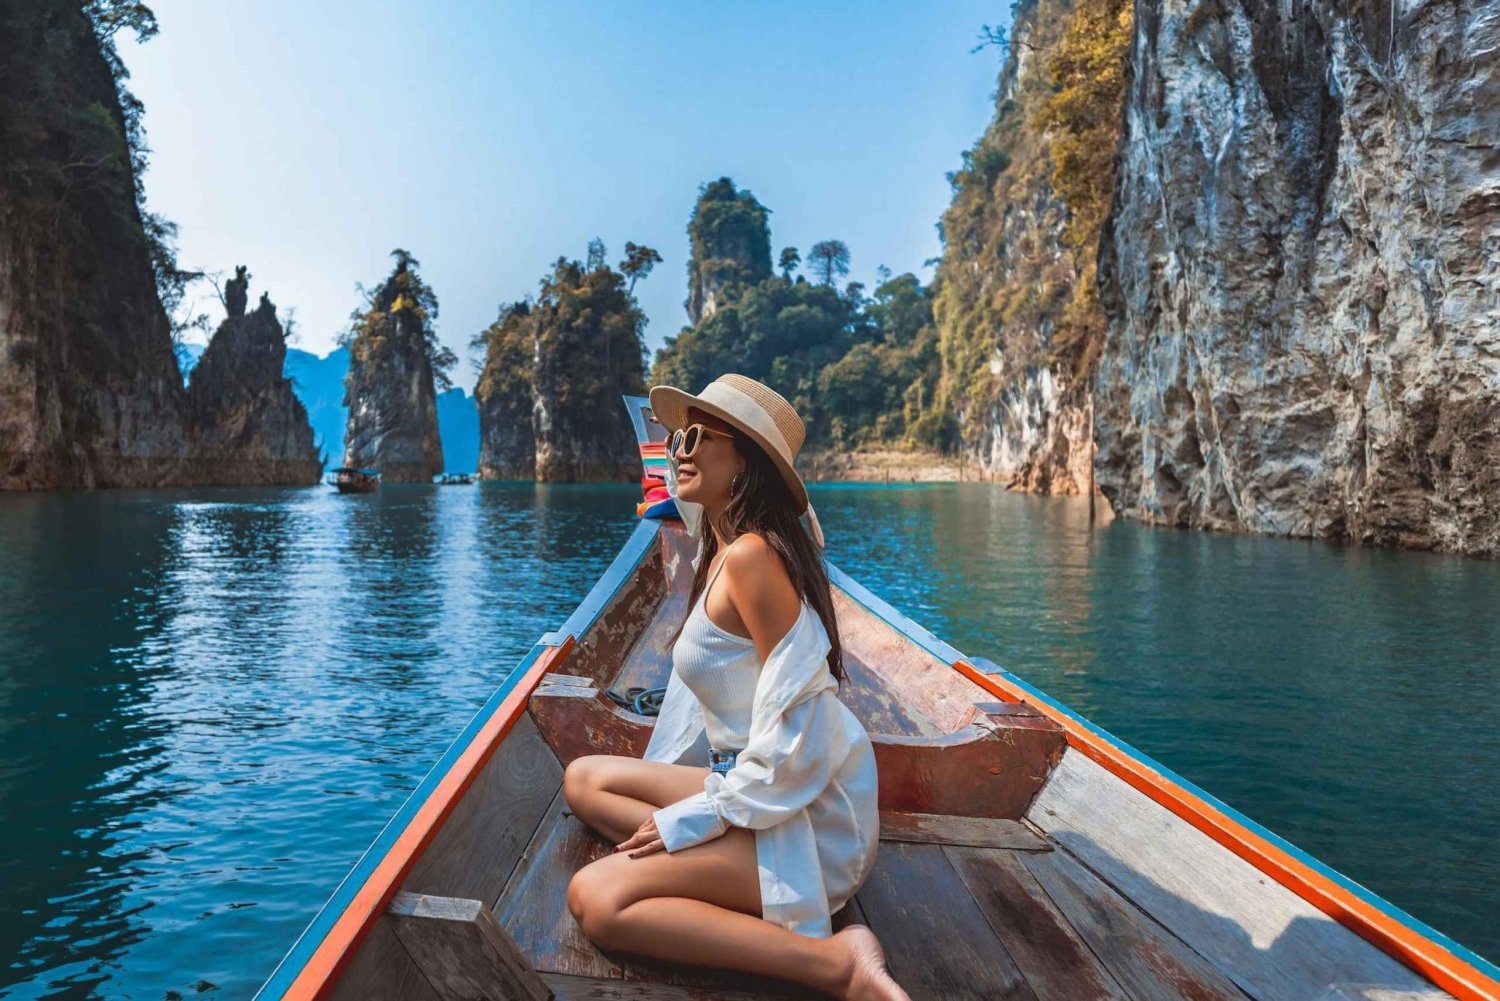 Phuket: Private Day Trip to Khao Sok with Longtail Boat Tour